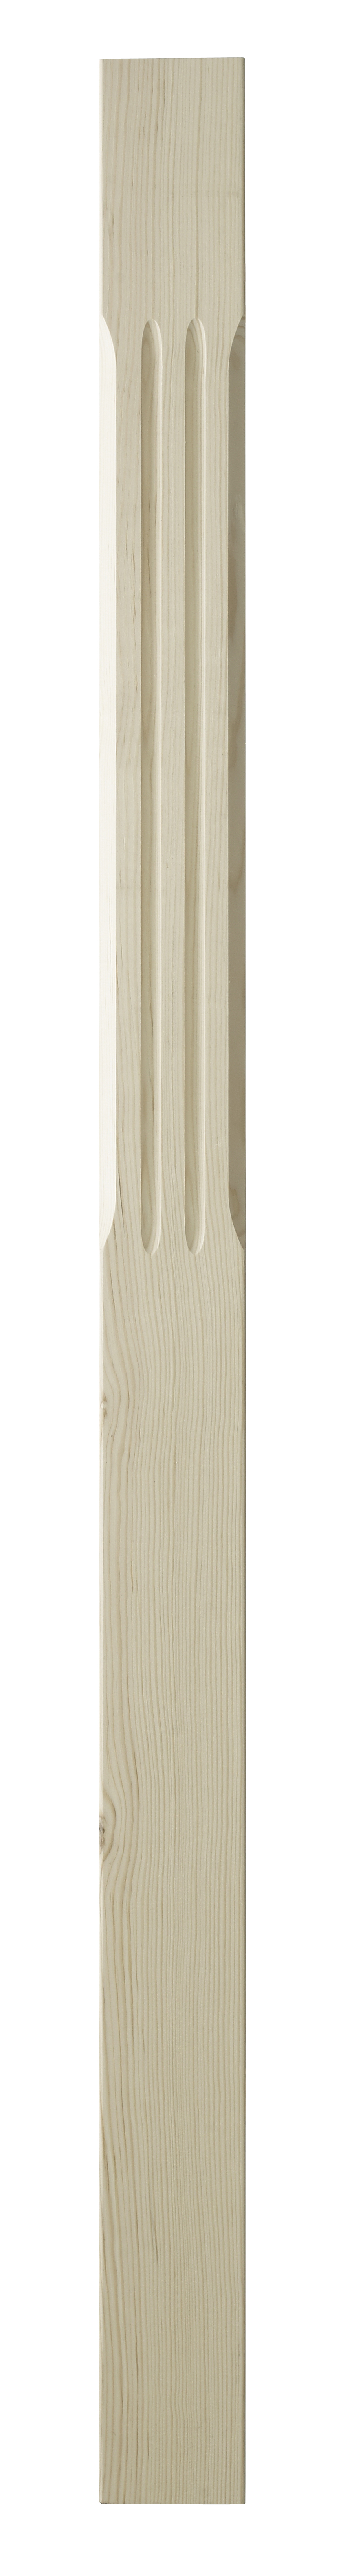 1 Pine Stop Chamfer Fluted Newel 1500 90